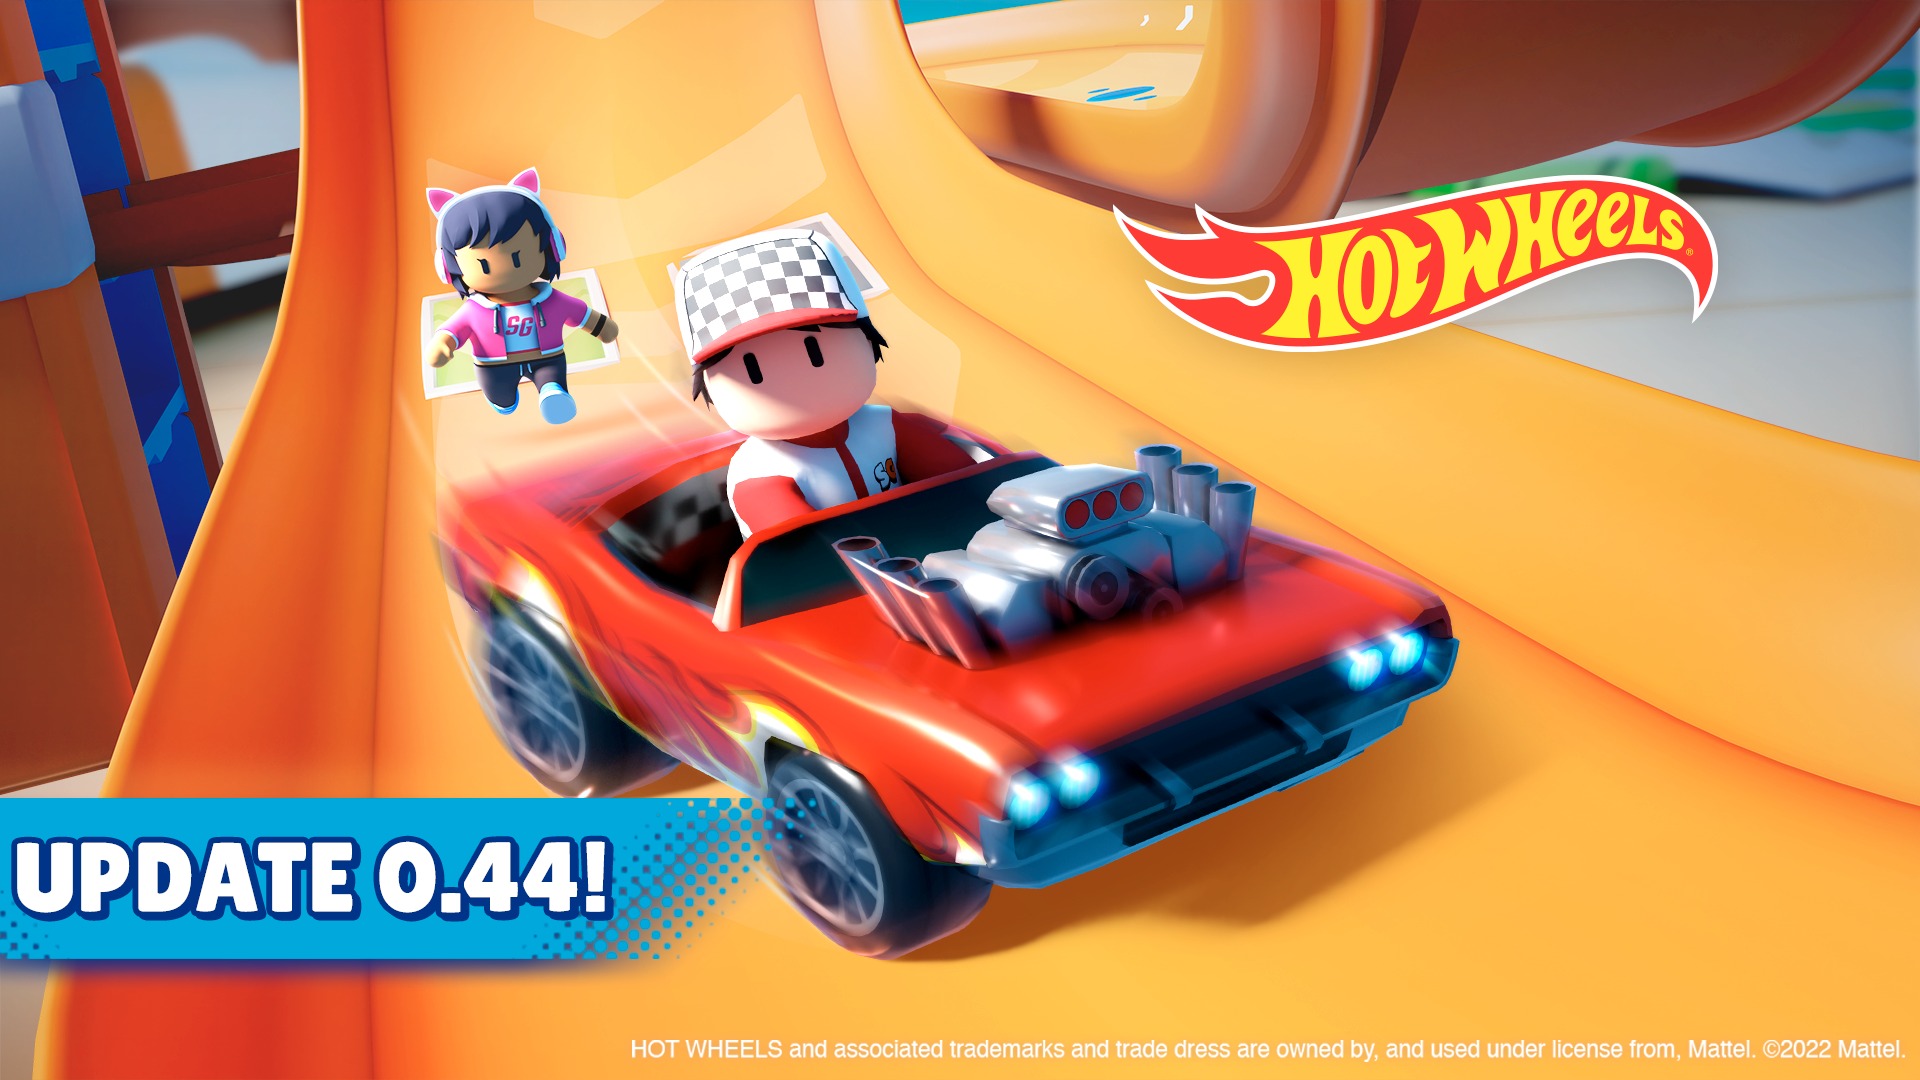 Stumble Guys” players can now tear up the race track with new driving mode  powered by Mattel's Hot Wheels™